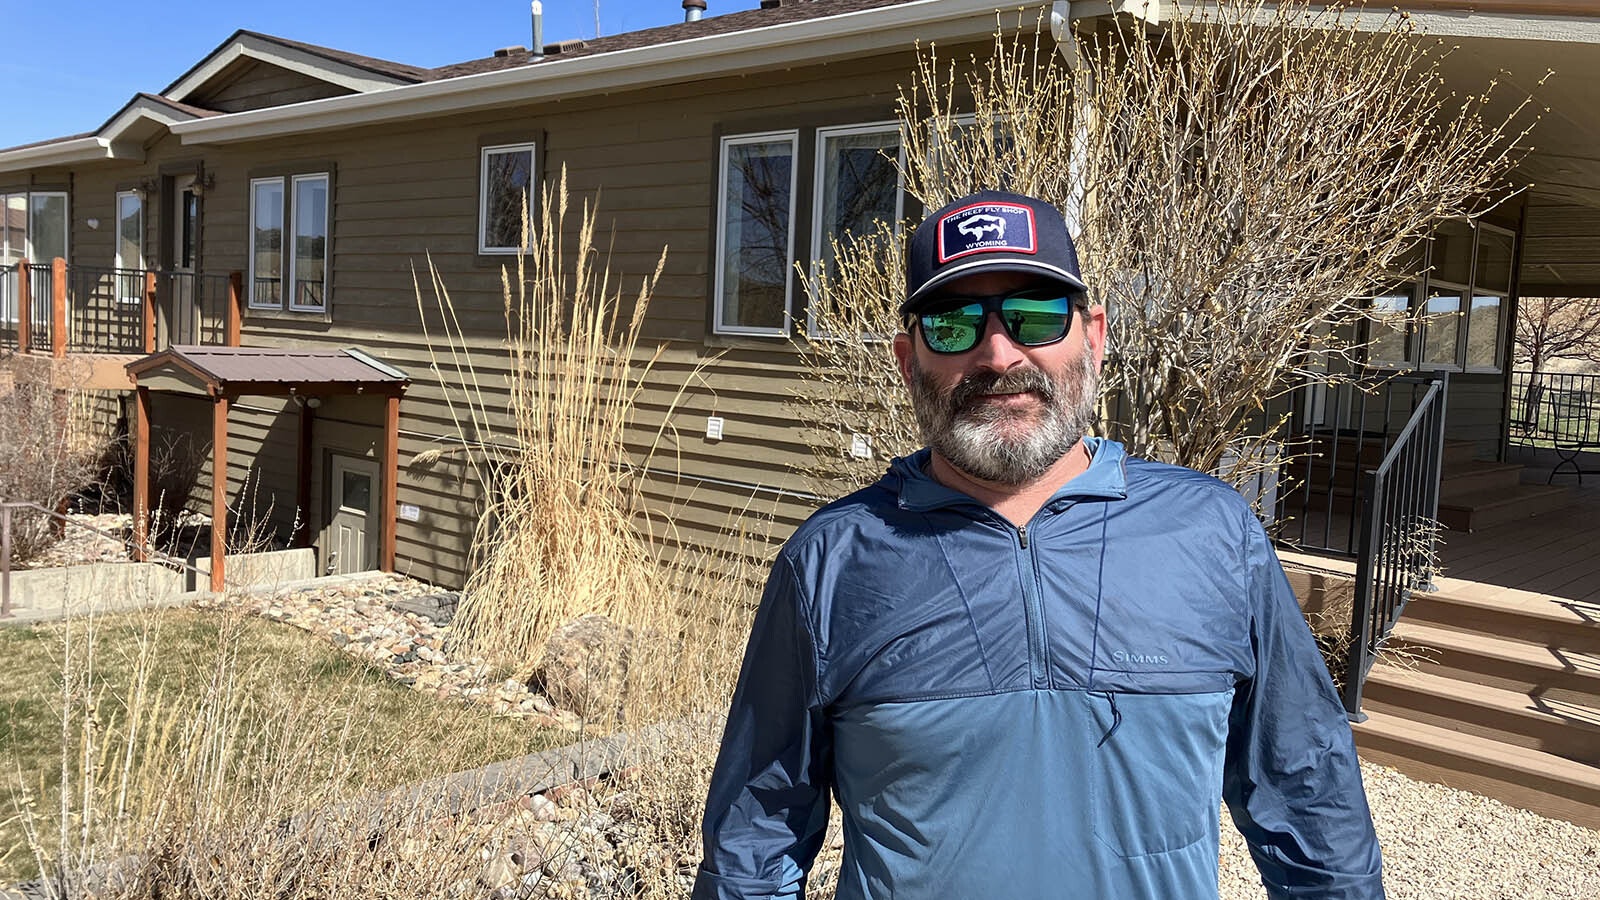 Alcova businessman and outfitter Trent Tatum said The Reef Fly Shop and North Platte Lodge offer customers opportunities get an all-inclusive experience fishing on an extremely productive stretch of the North Platte River.